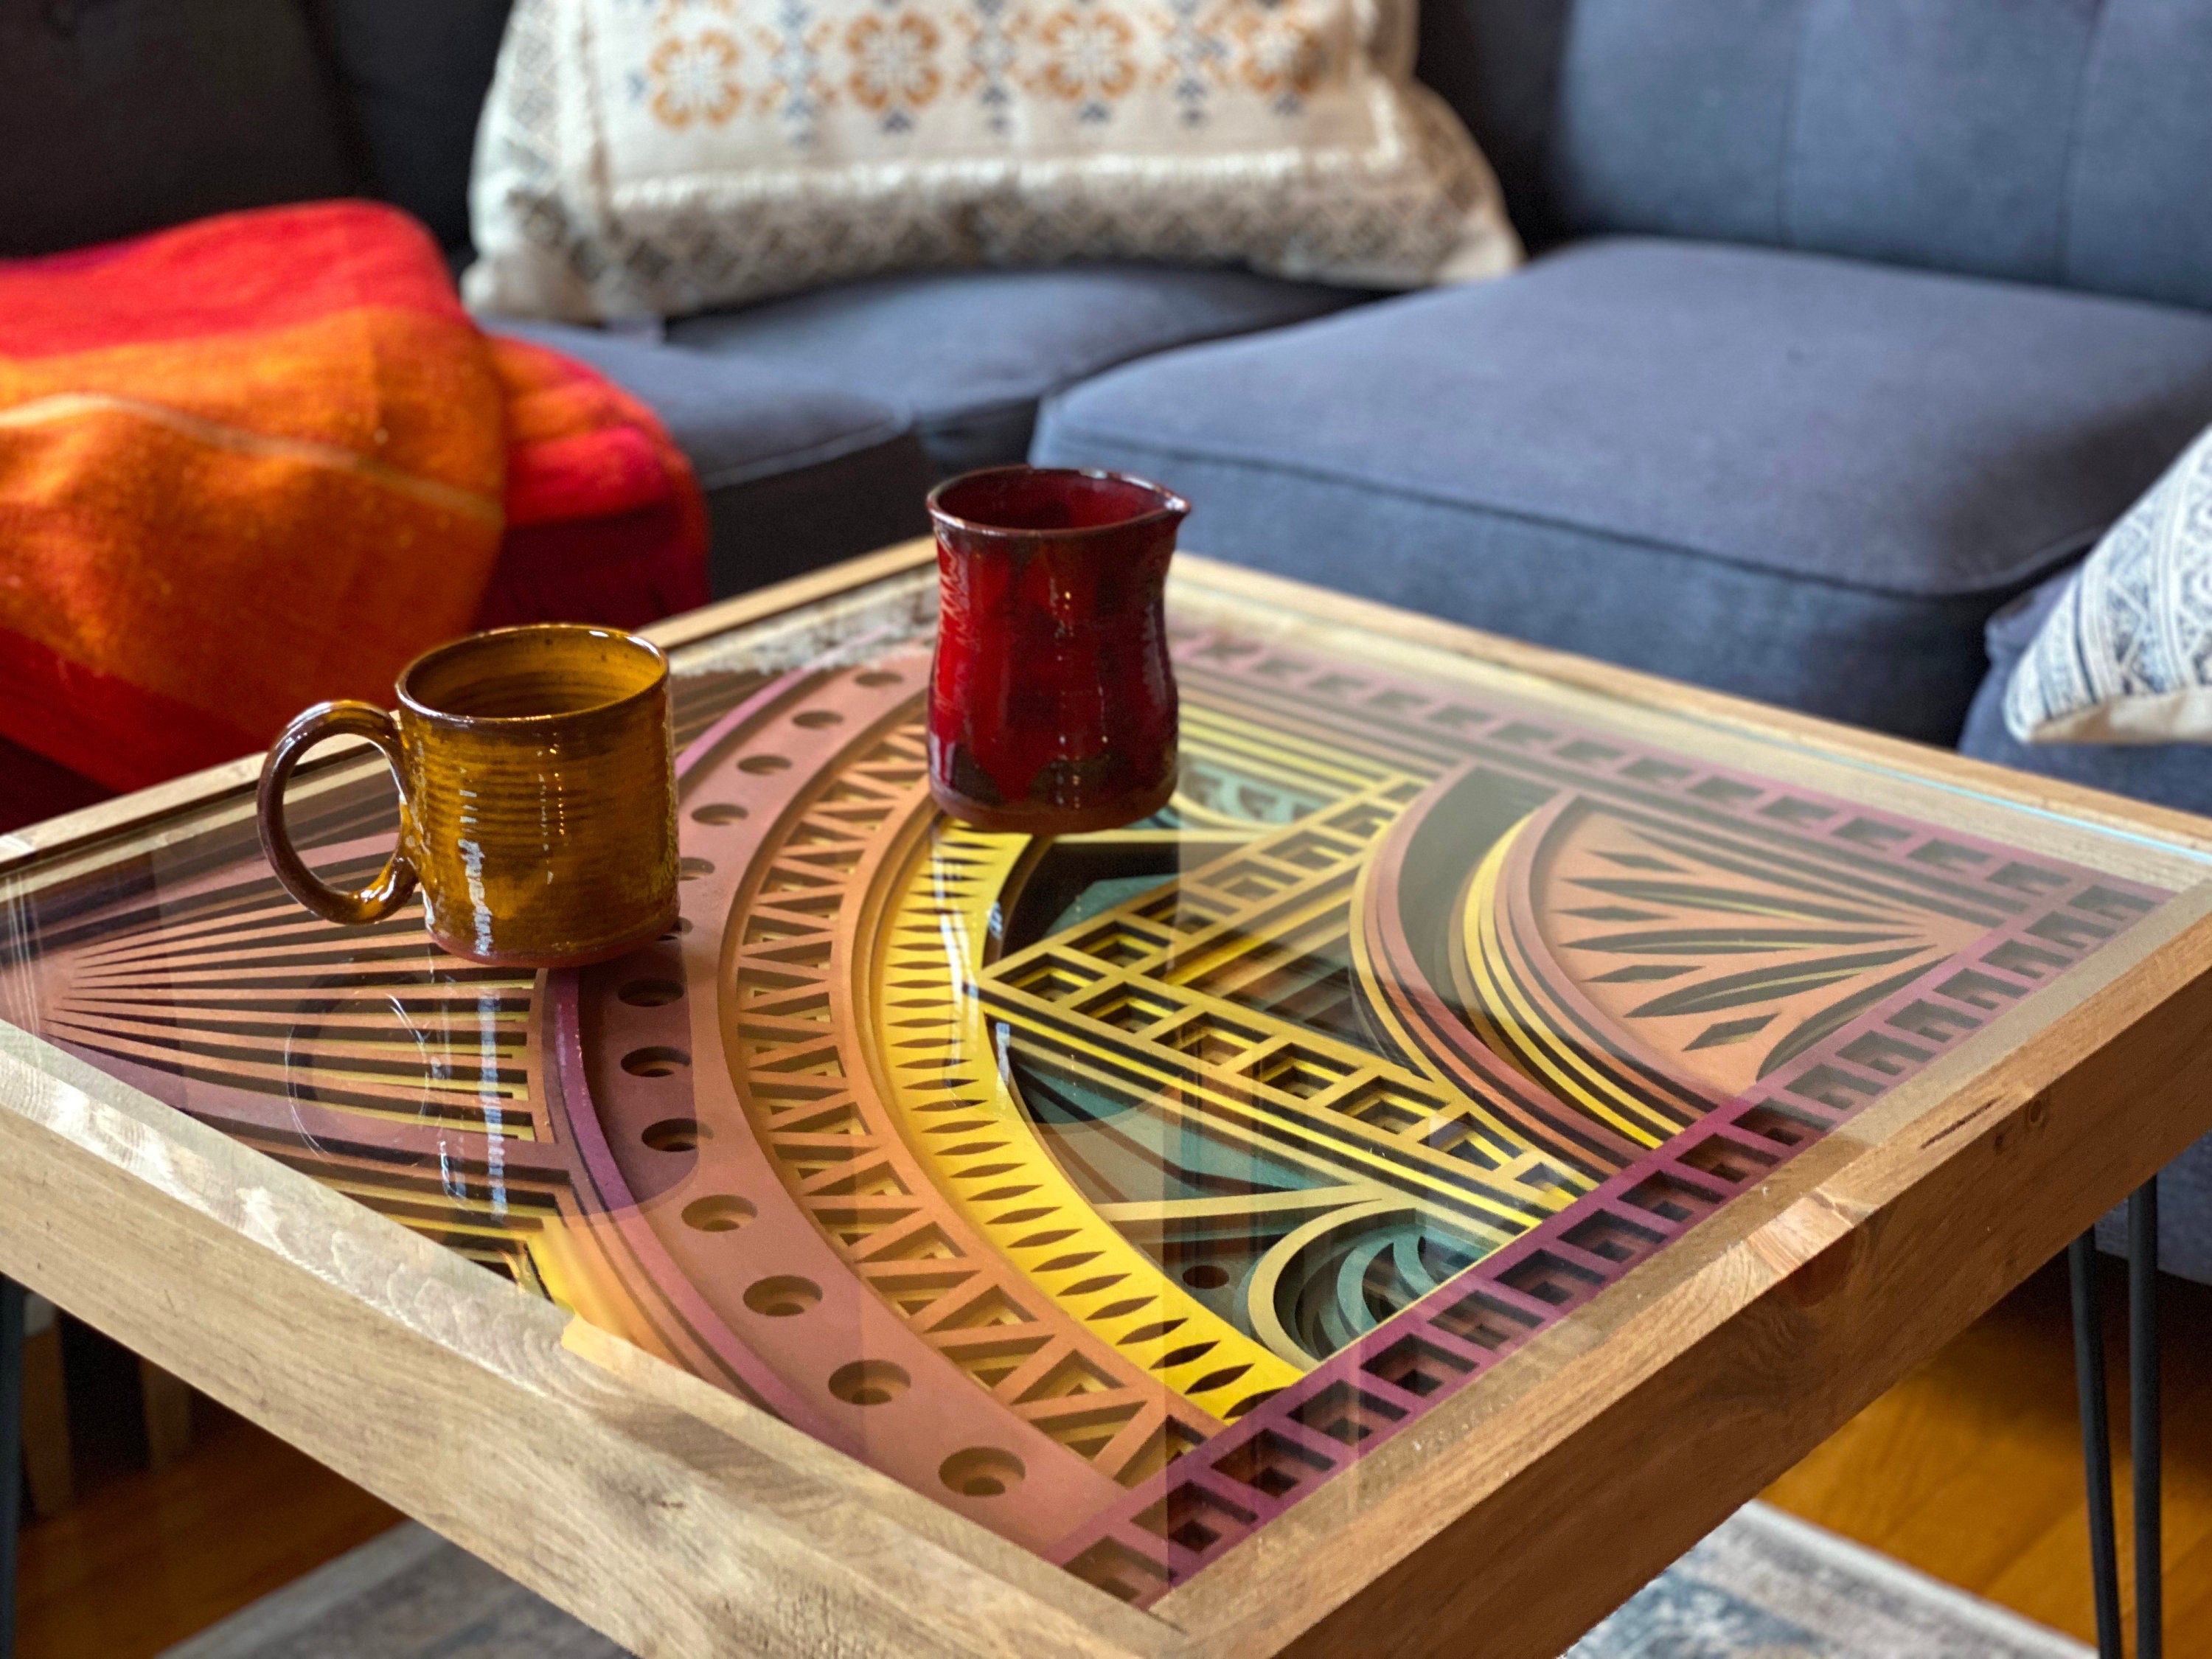 Red, Orange, Yellow Mandala Coffee Table - Warm Autumn Colors - 100% Made in the USA - 25x25"